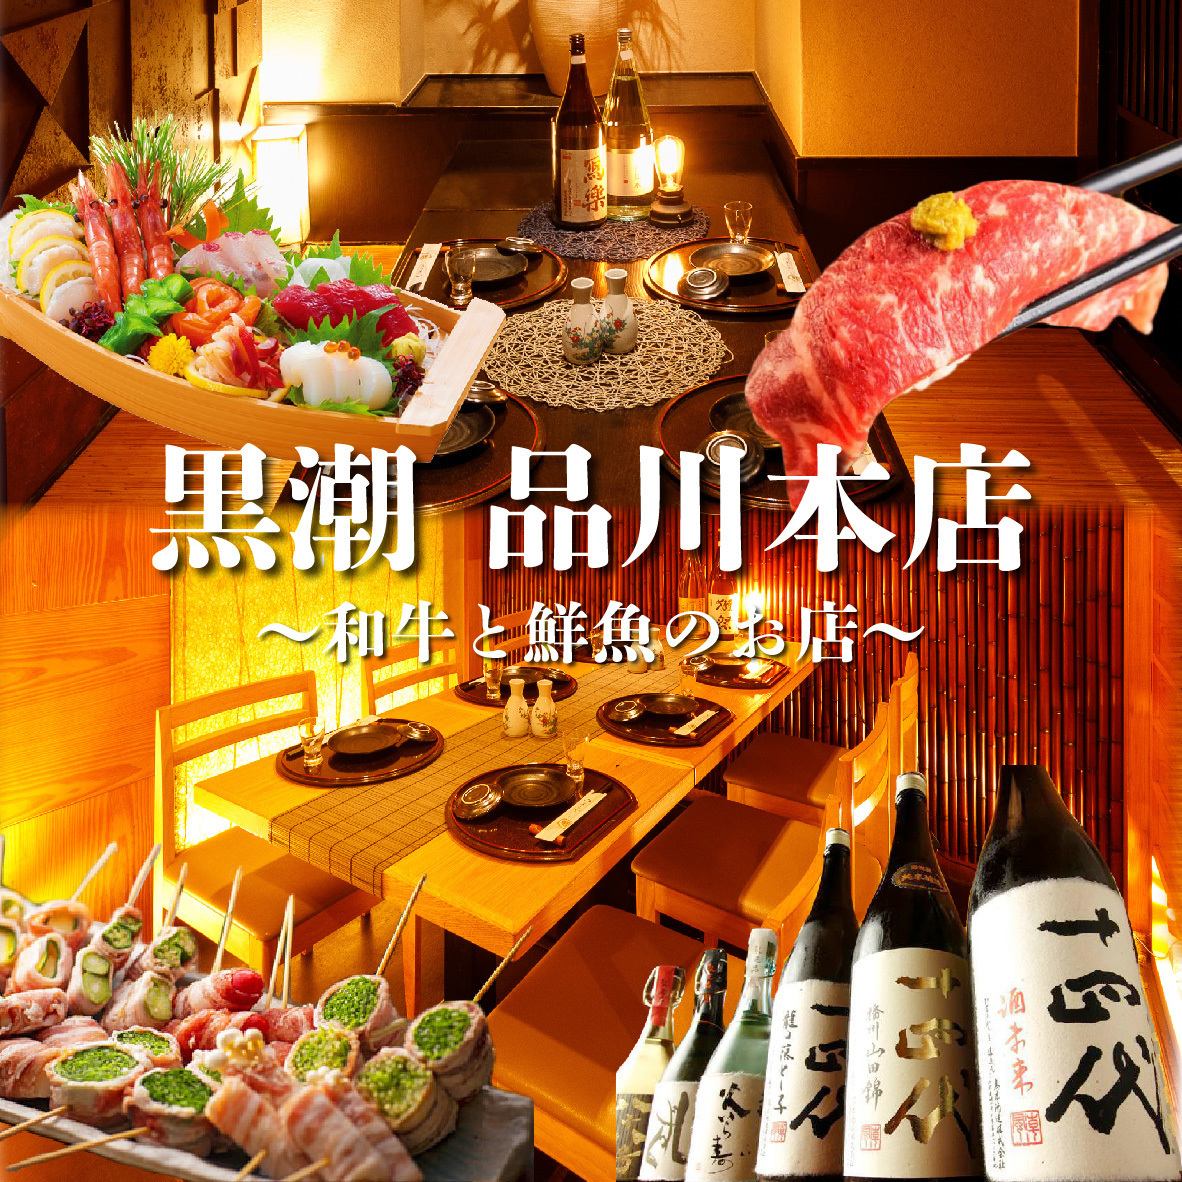 ■Authentic Japanese food x Creative Japanese food Kuroshio ■Banquets and receptions/9 dishes total 3,480 yen (tax included)/Online reservations accepted 24 hours a day